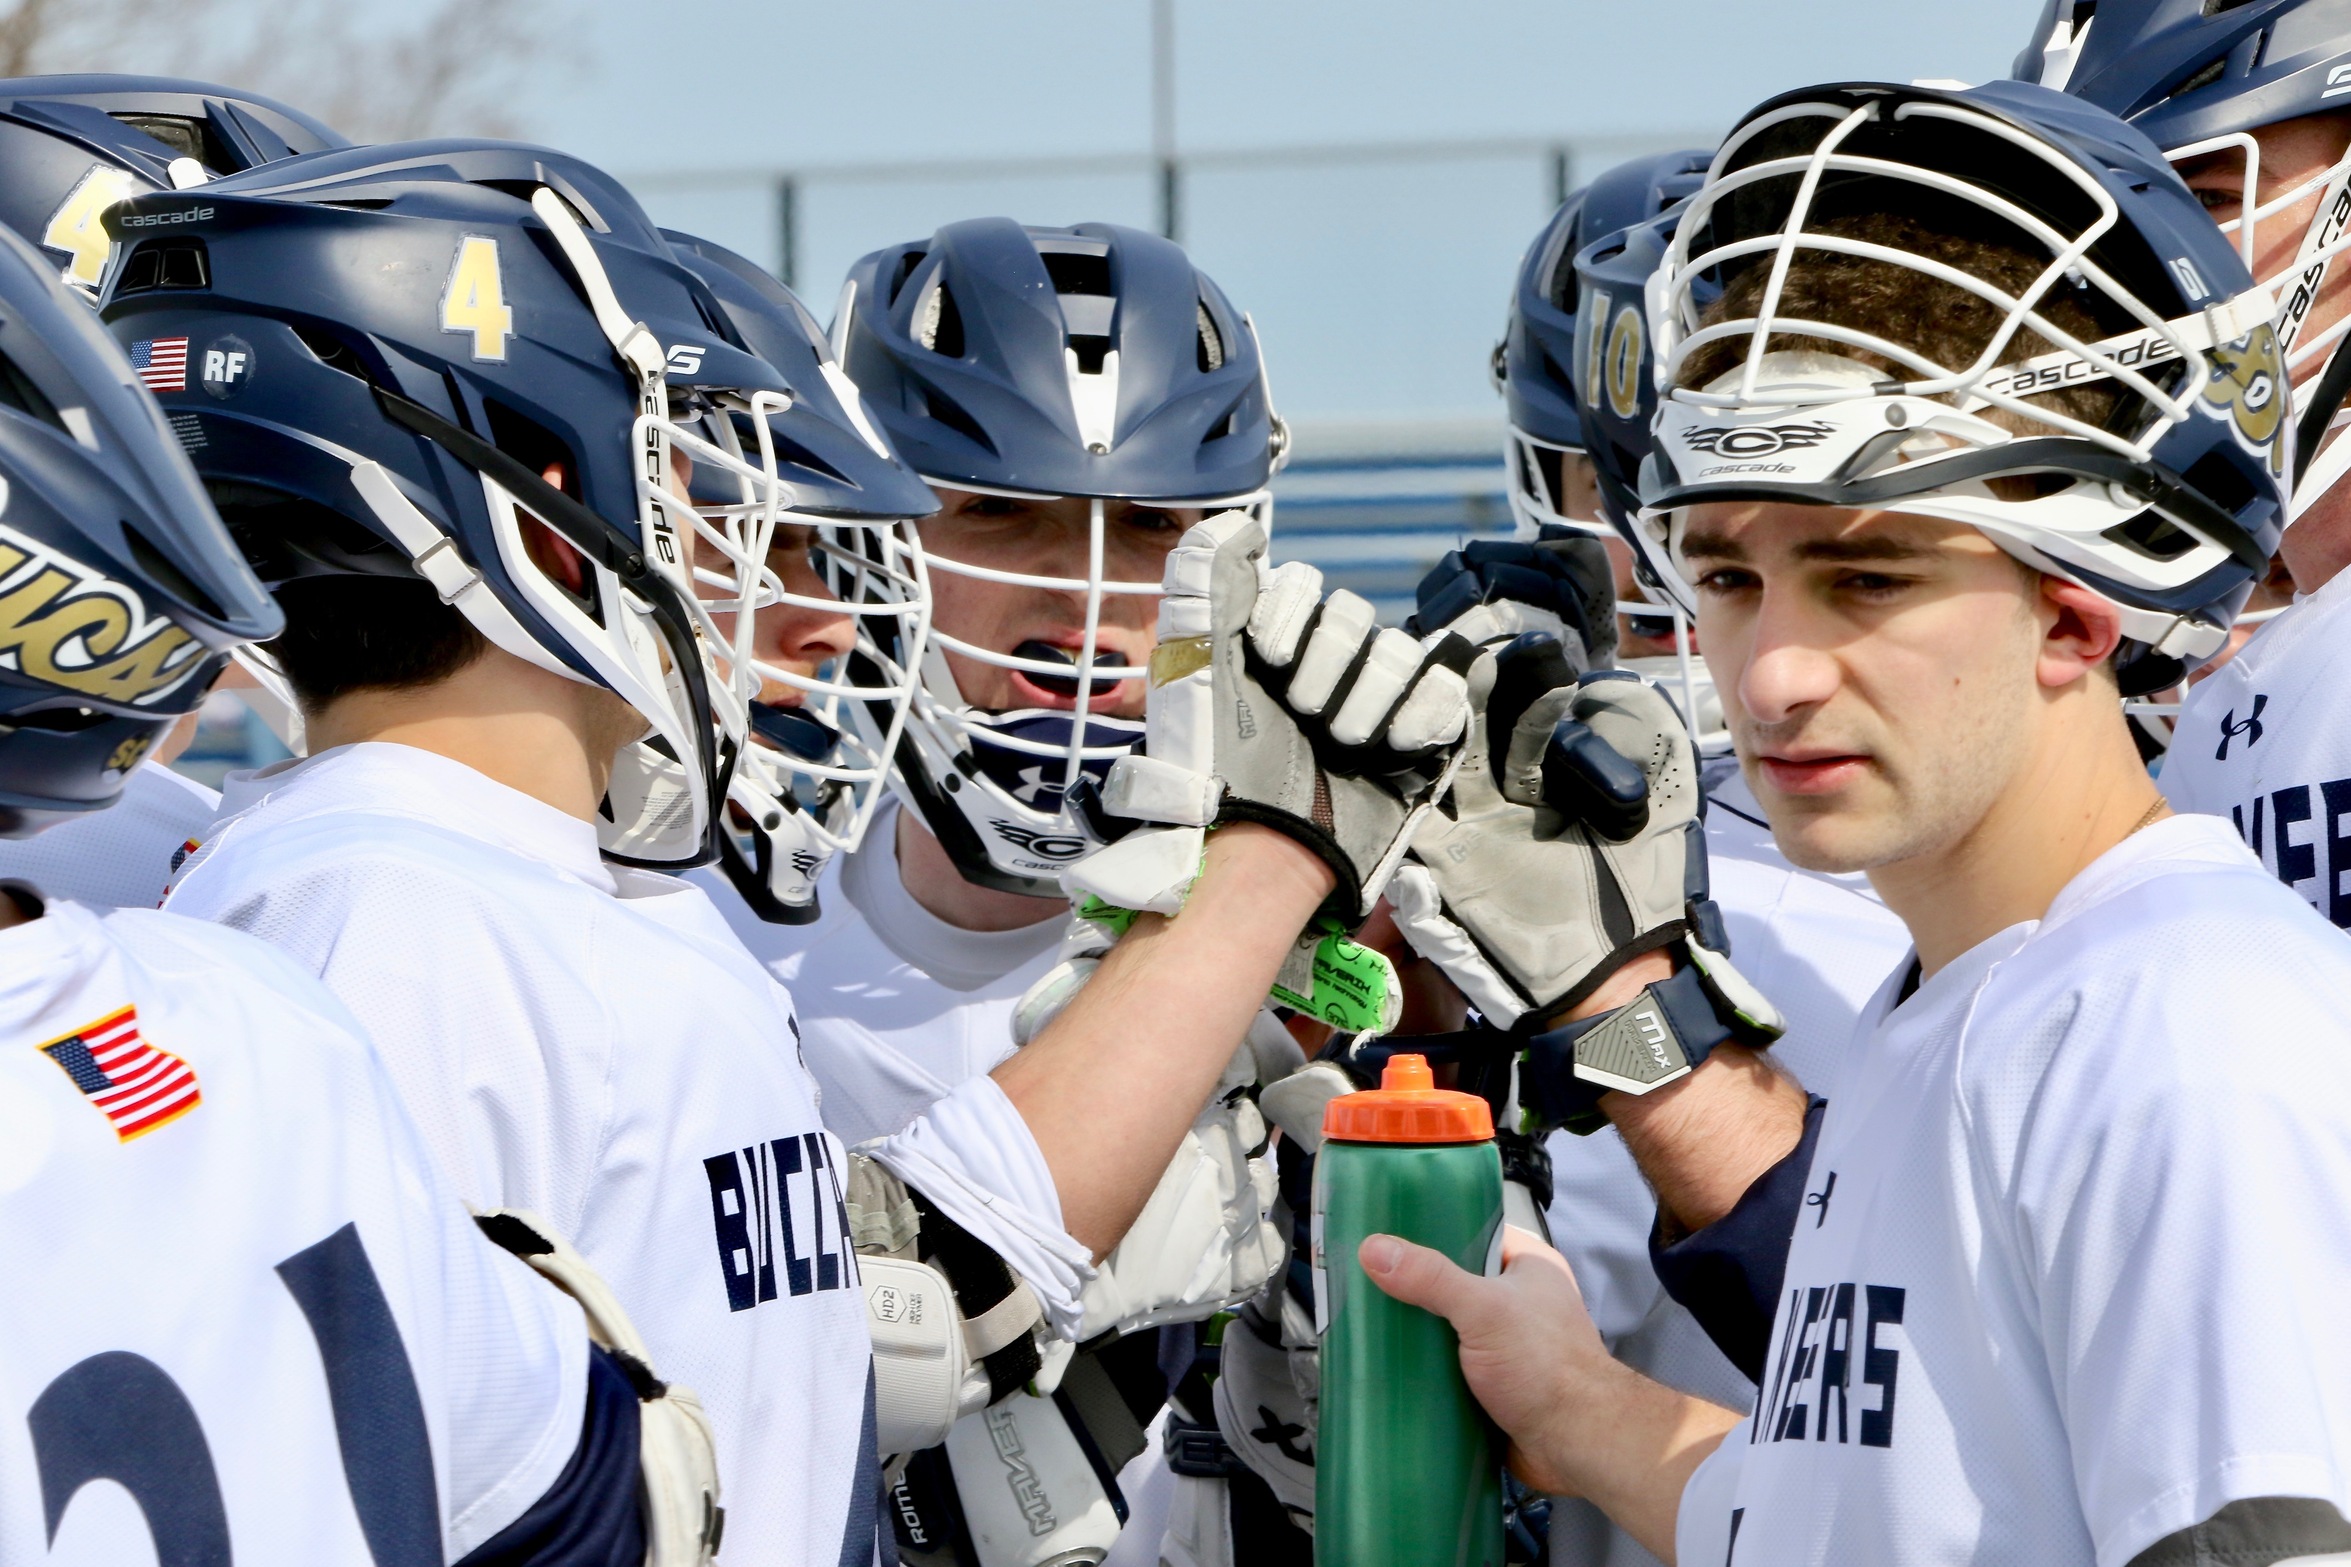 Men's Lacrosse: Buccaneers Can't Hold Seahawks off in Loss